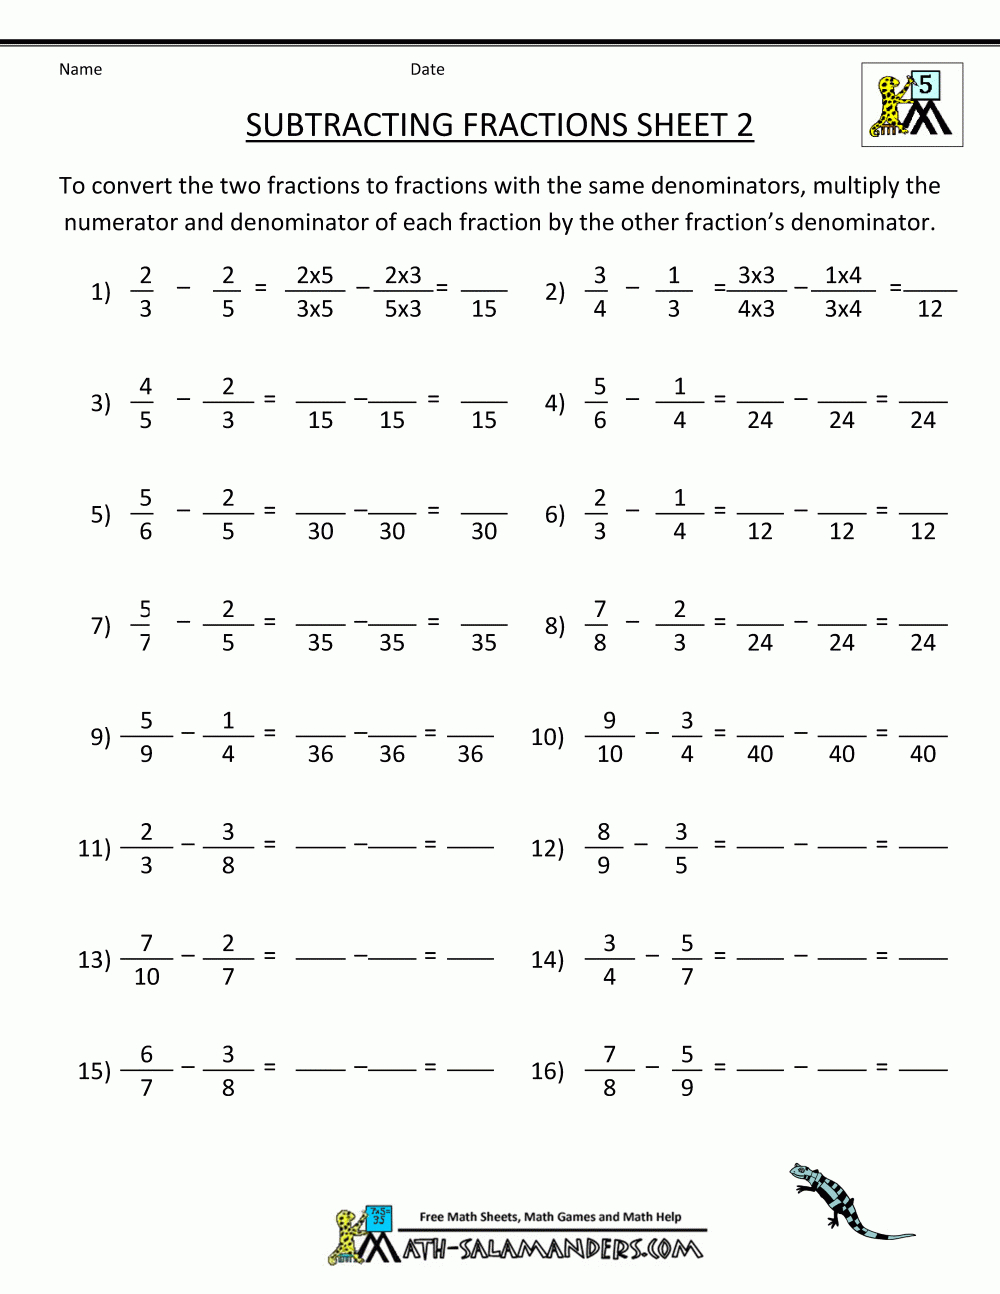 Free Printable Fraction Worksheets Subtracting Fractions 2 | Math - Free Printable Worksheets For 5Th Grade